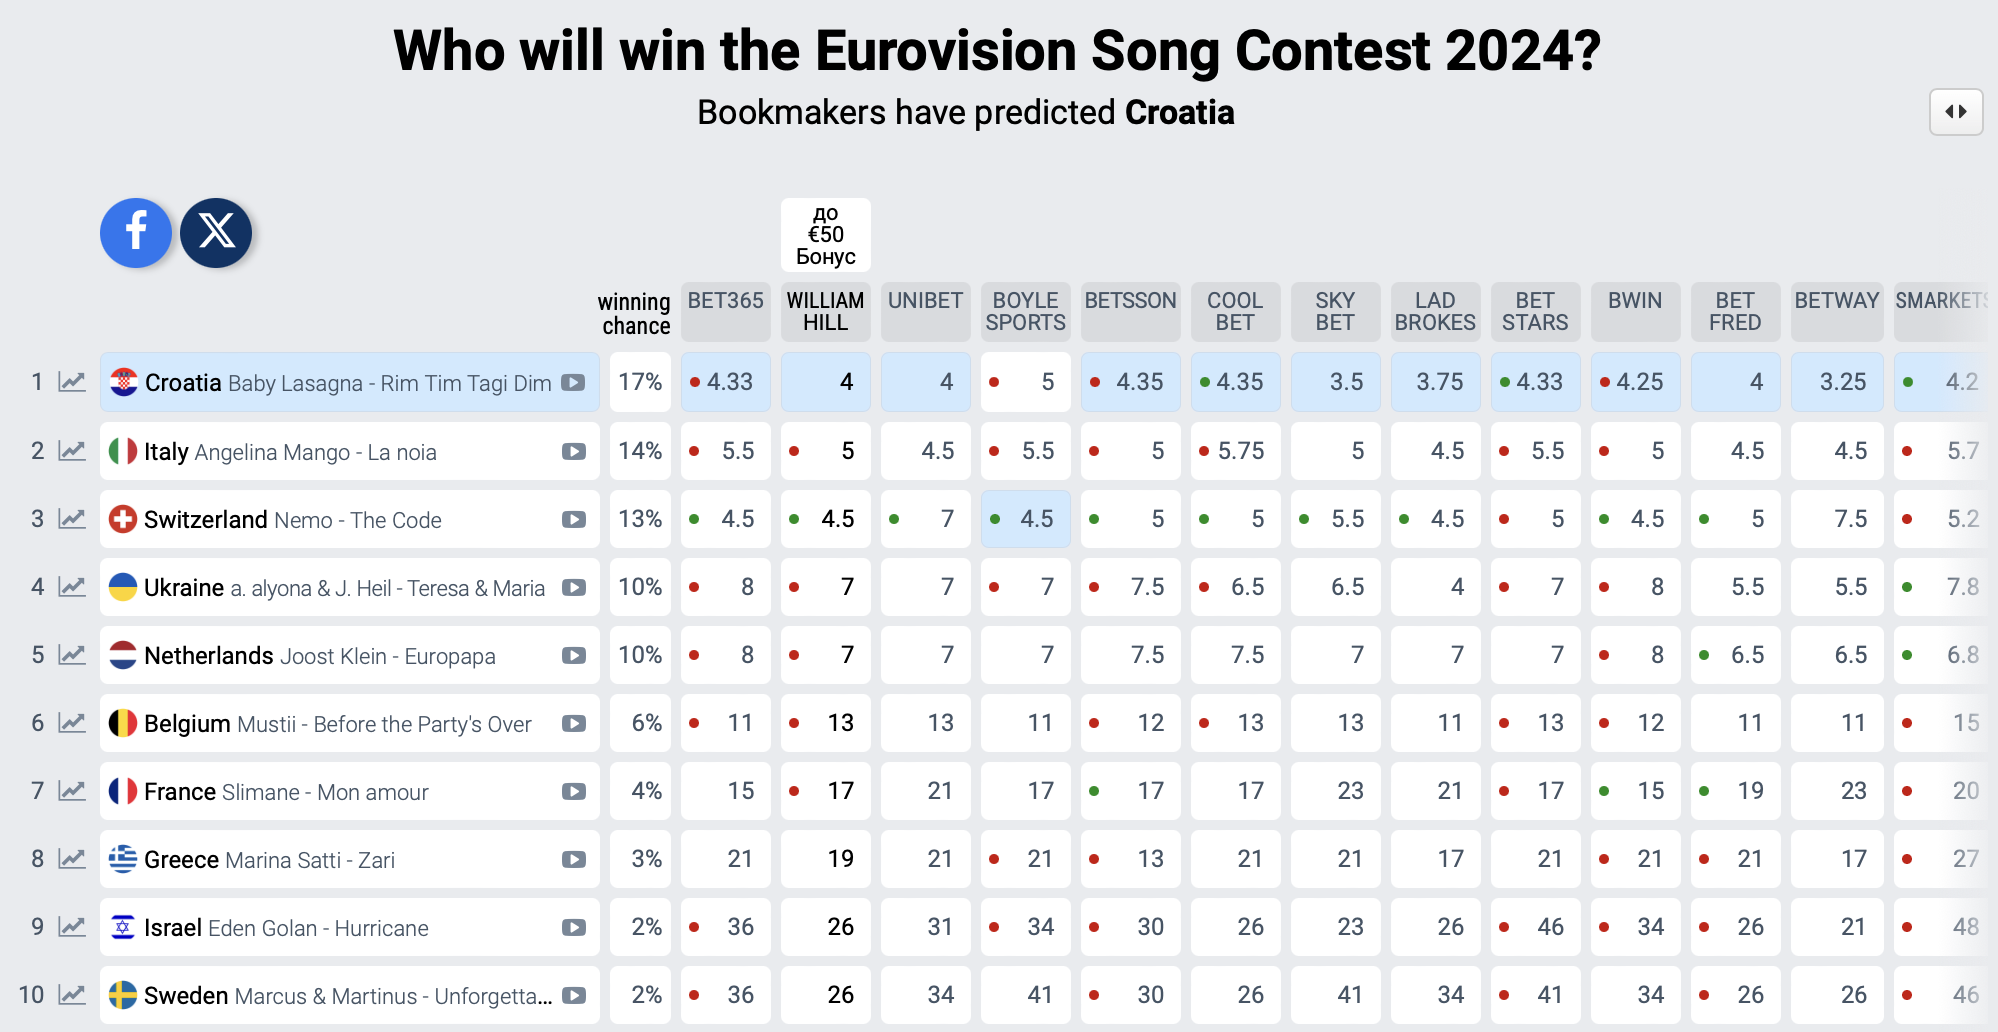 For the first time, Ukraine dropped out of the top three in the bookmakers' ranking of the Eurovision Song Contest 2024: who replaced alyona alyona and Jerry Heil